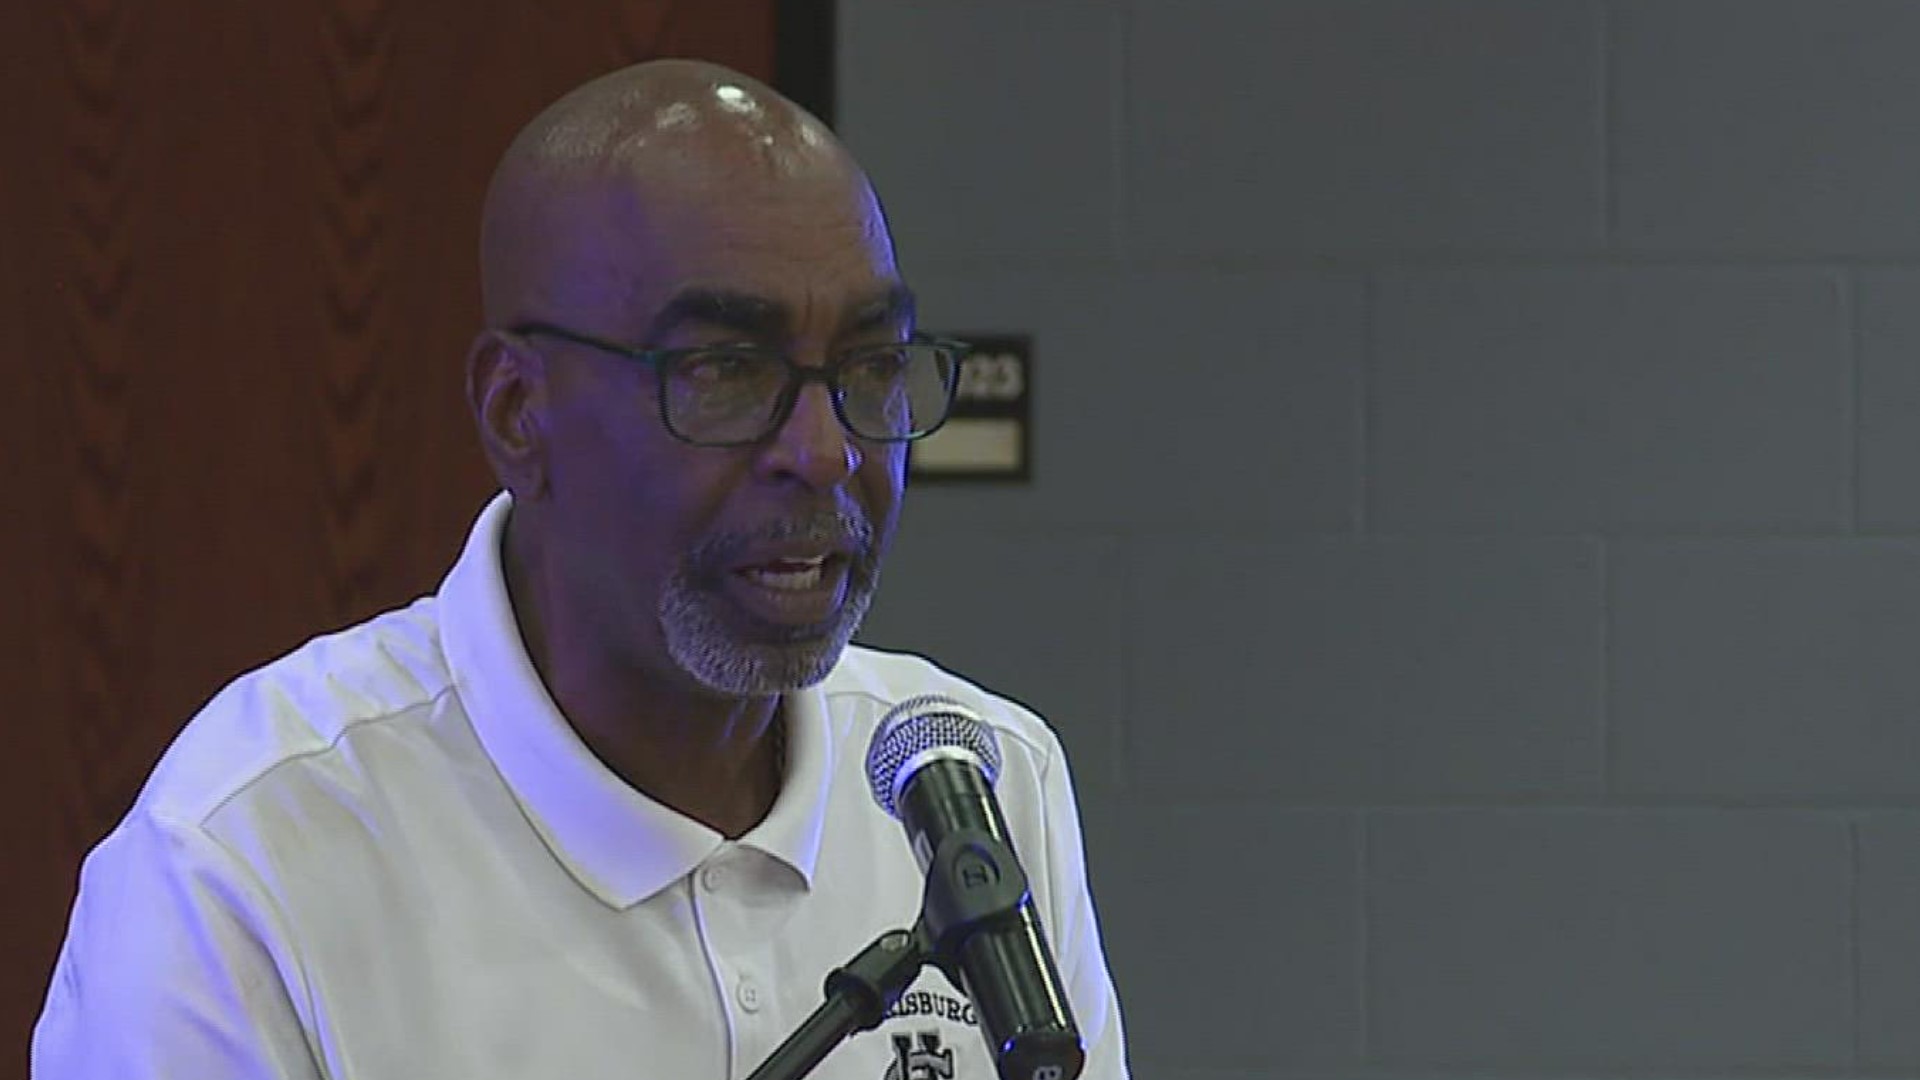 Members of the Harrisburg community, as well as former players, came to celebrate Coach Larry Moore's leadership in the school district and beyond.